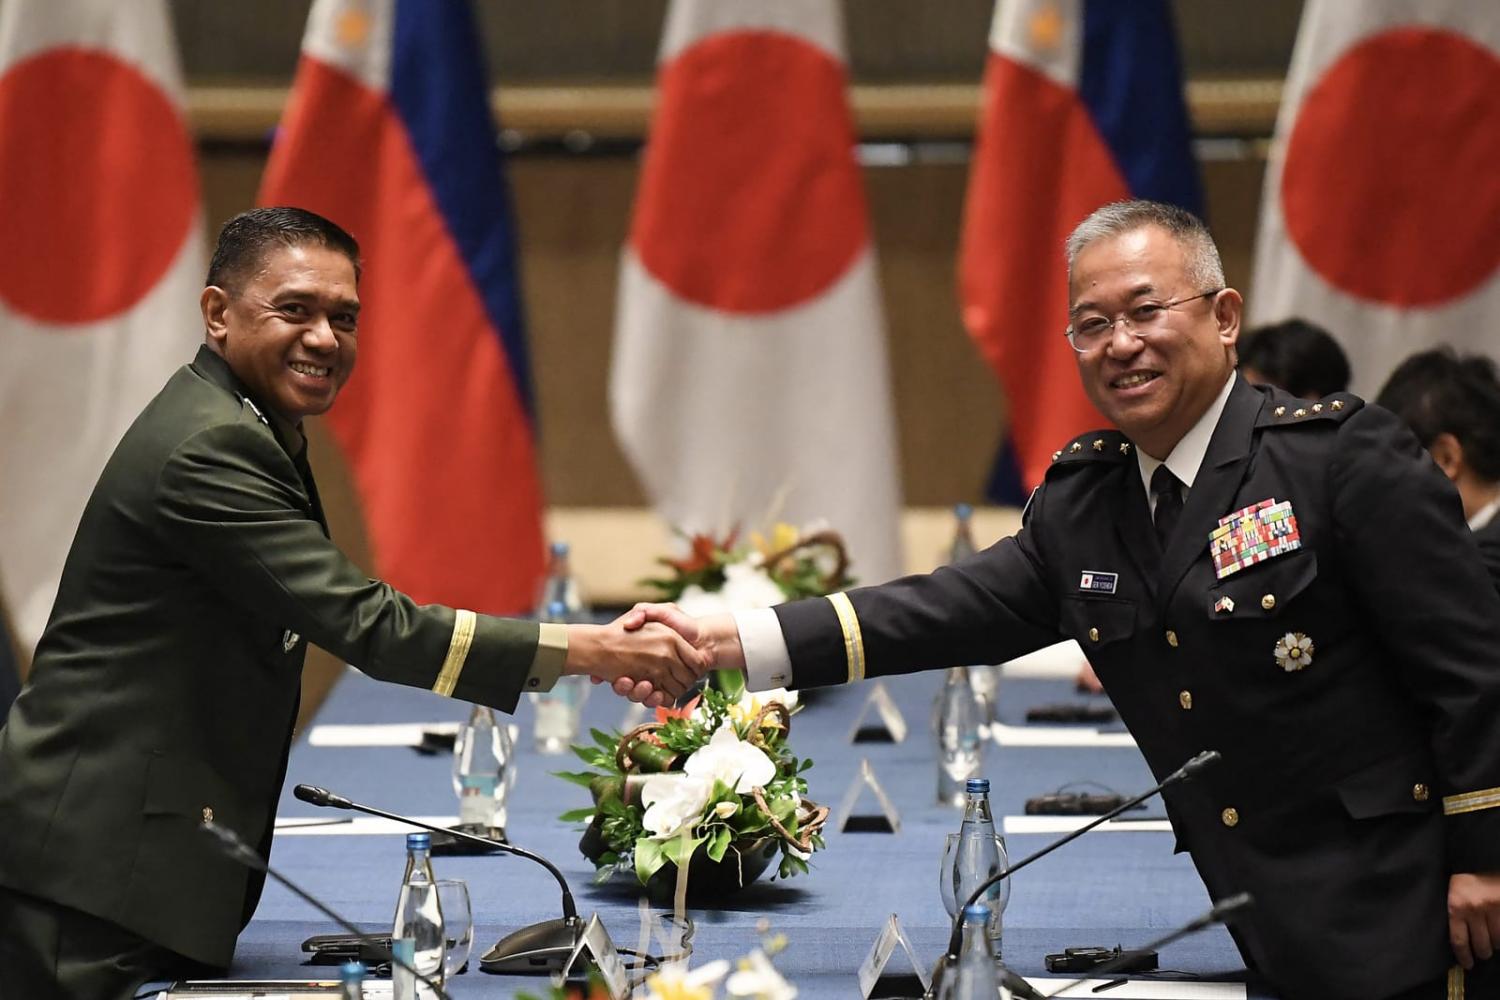 Armed Forces of the Philippines Chief of Staff General Romeo Brawner, left, shakes hands with Yoshihide Yoshida, Chief of Staff, Joint Staff of Japan's Self Defence Force, in Manila, 8 July (Ted Aljibe/AFP via Getty Images)